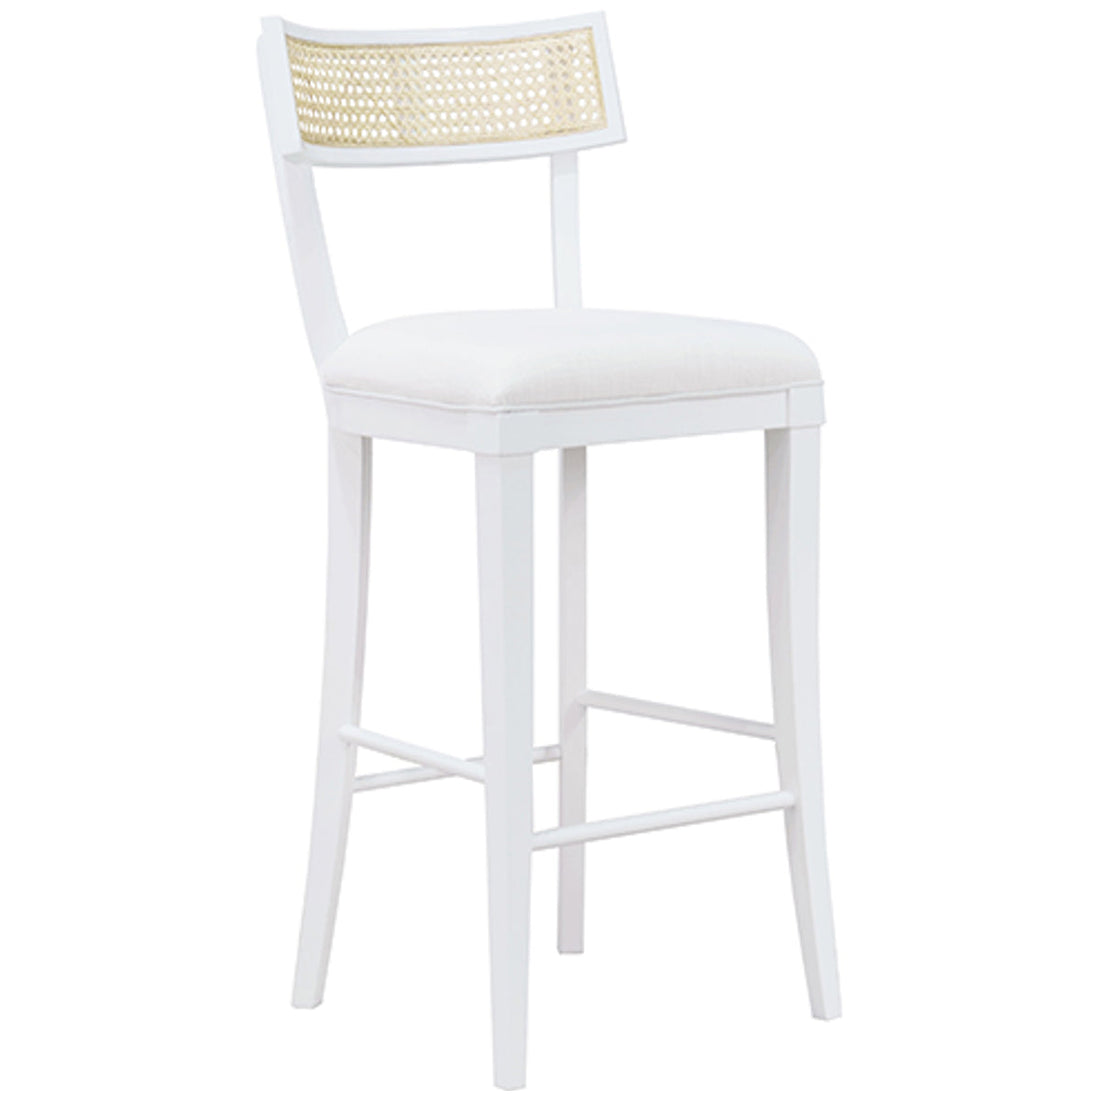 Worlds Away Klismos Bar Stool with Cane Detail in Matte White Lacquer